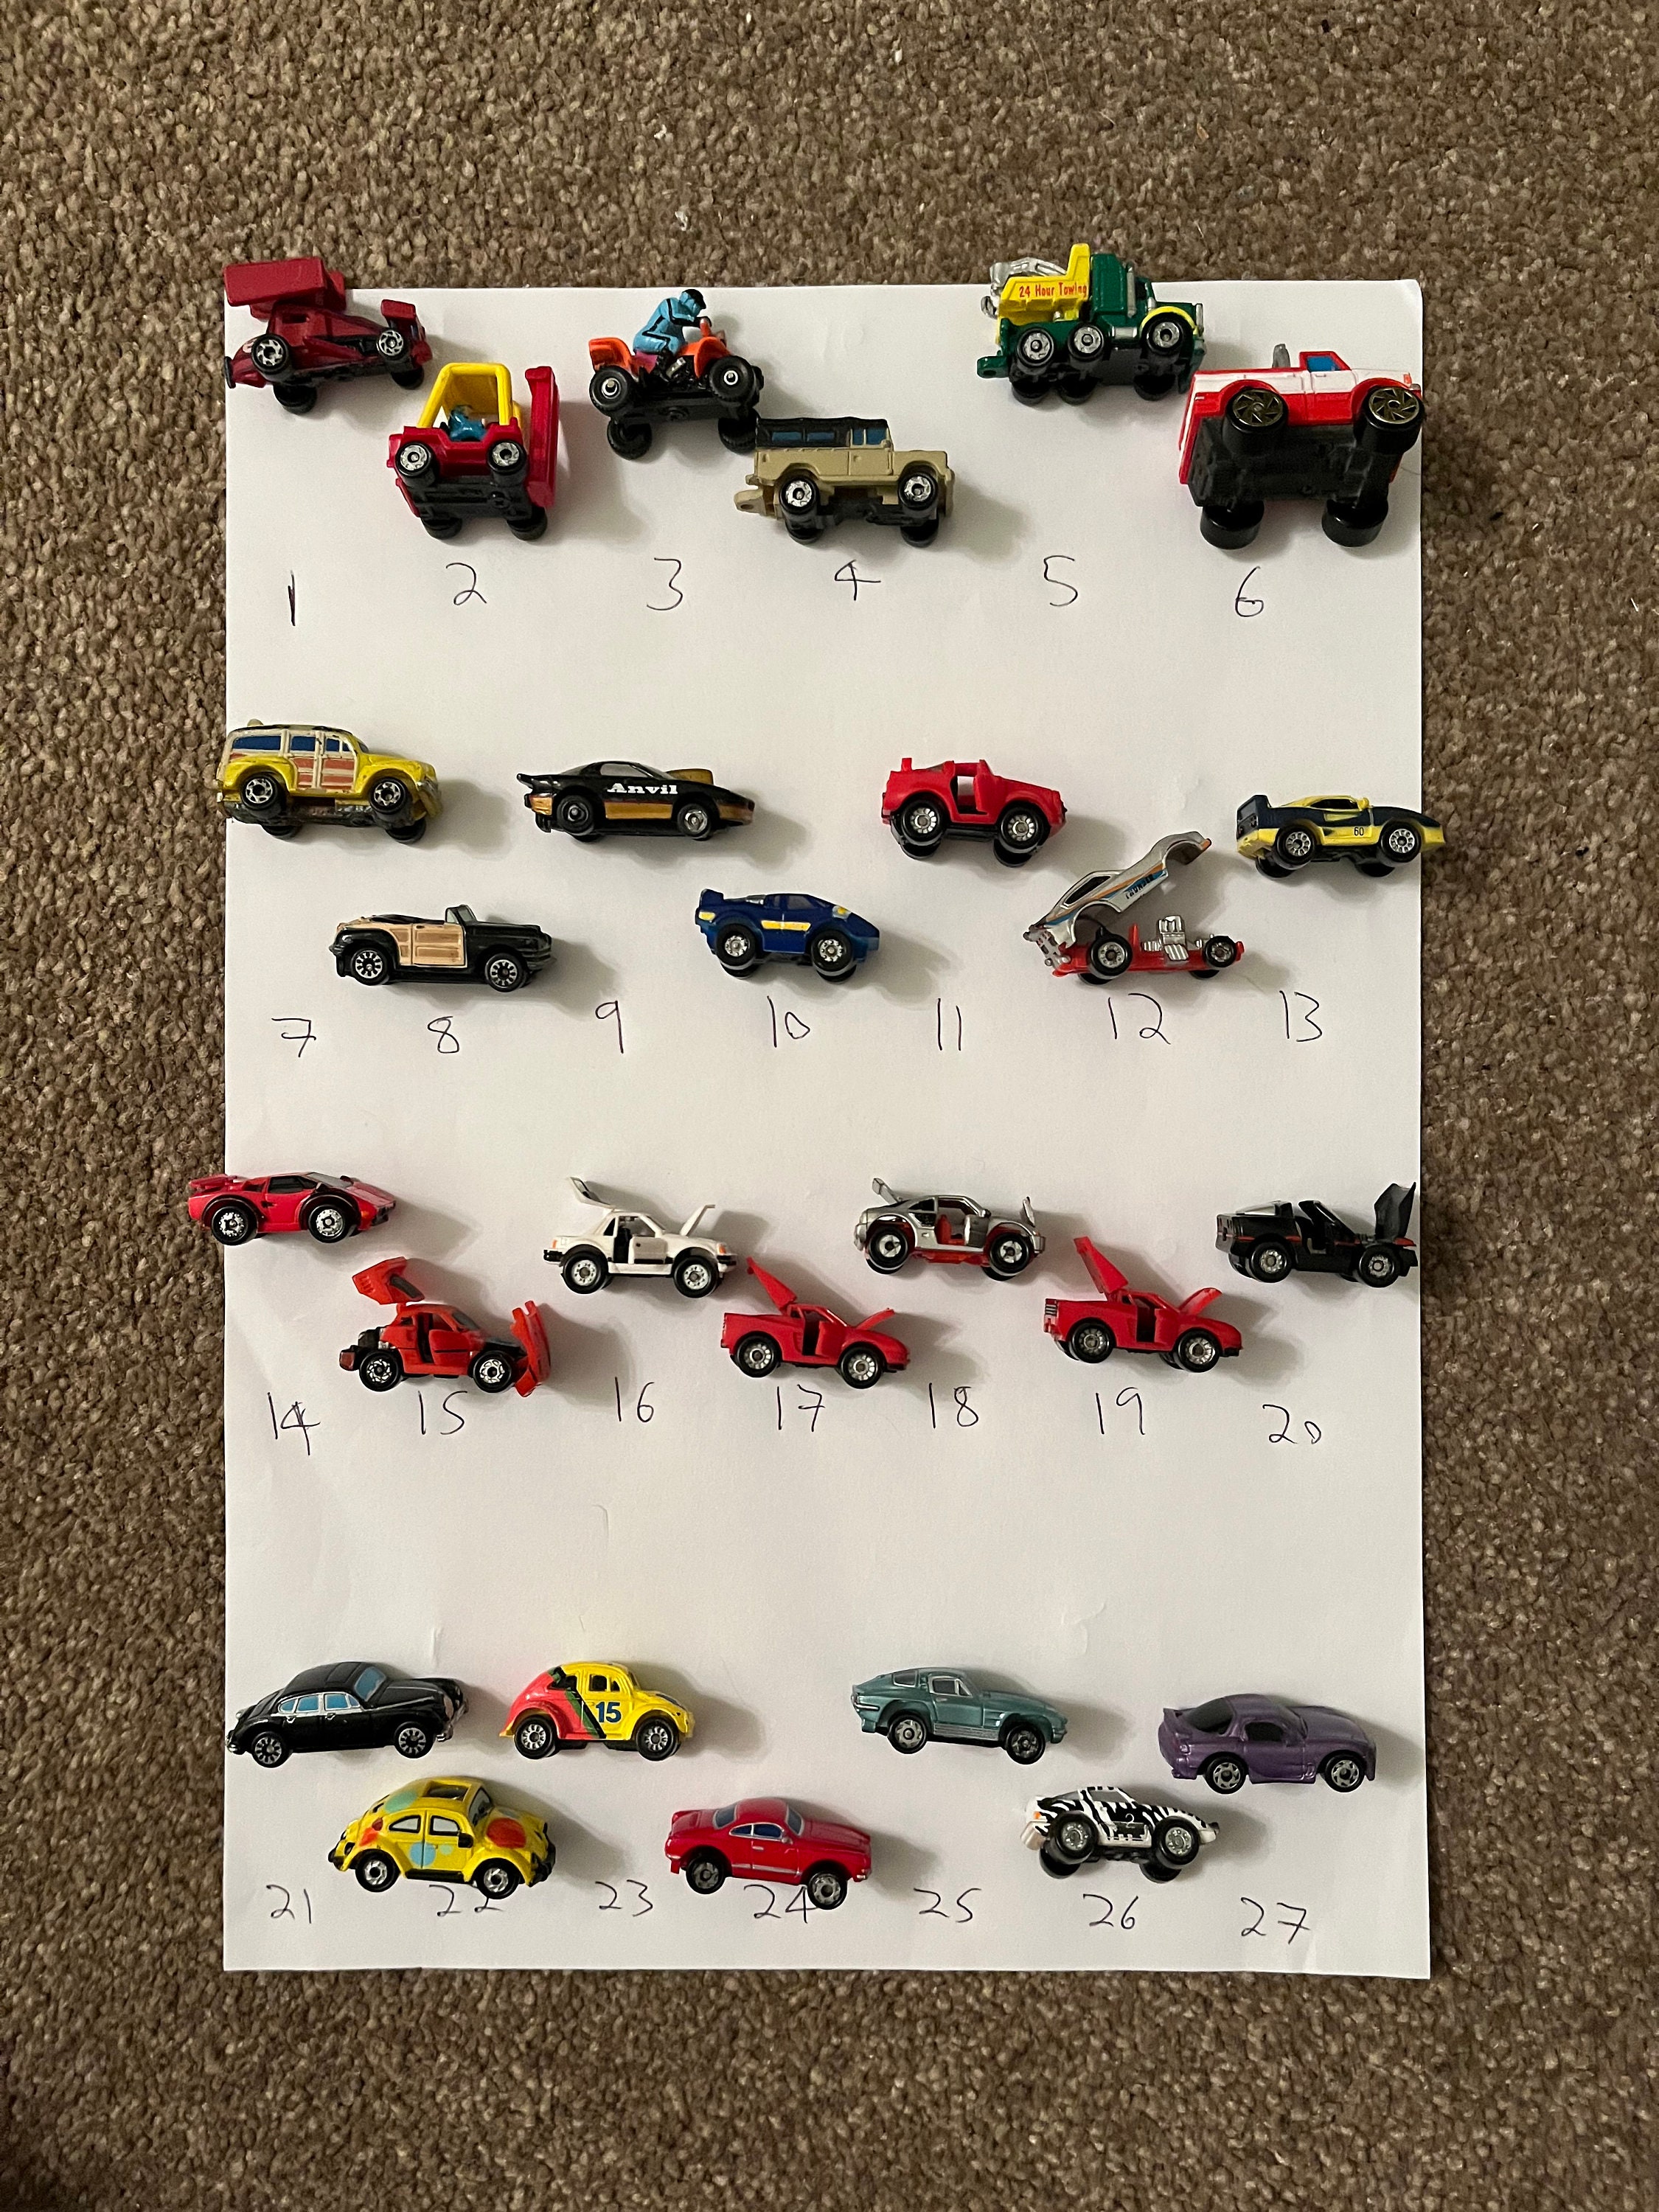 Micro Machines Vintage Rare Vehicles Please Choose From Drop Down List 